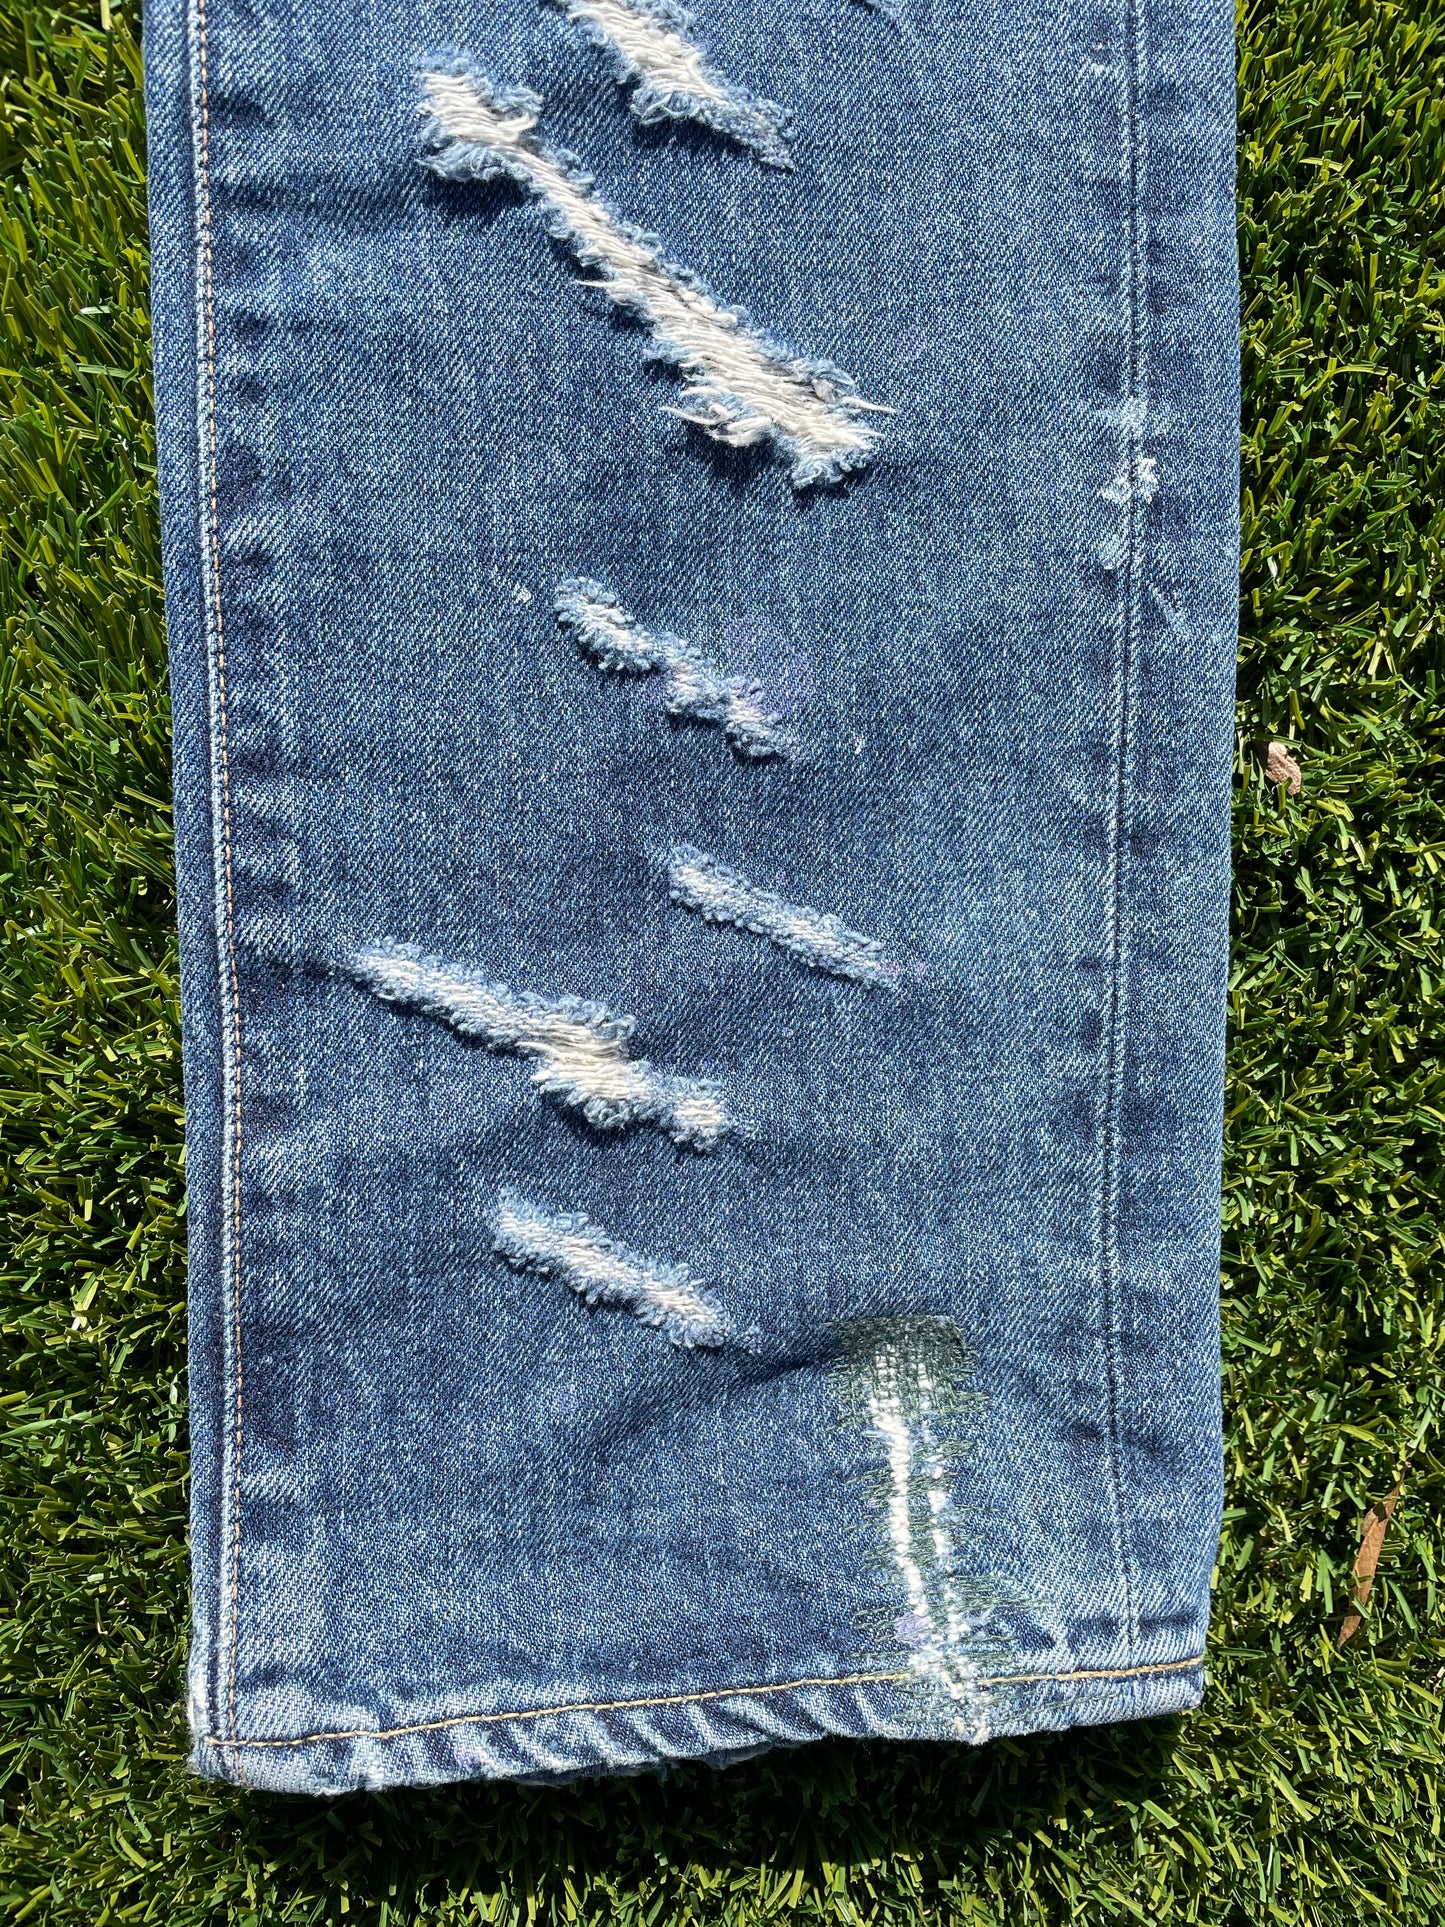 SS05’ But Beautiful - Undercover Distressed Stitched Denim